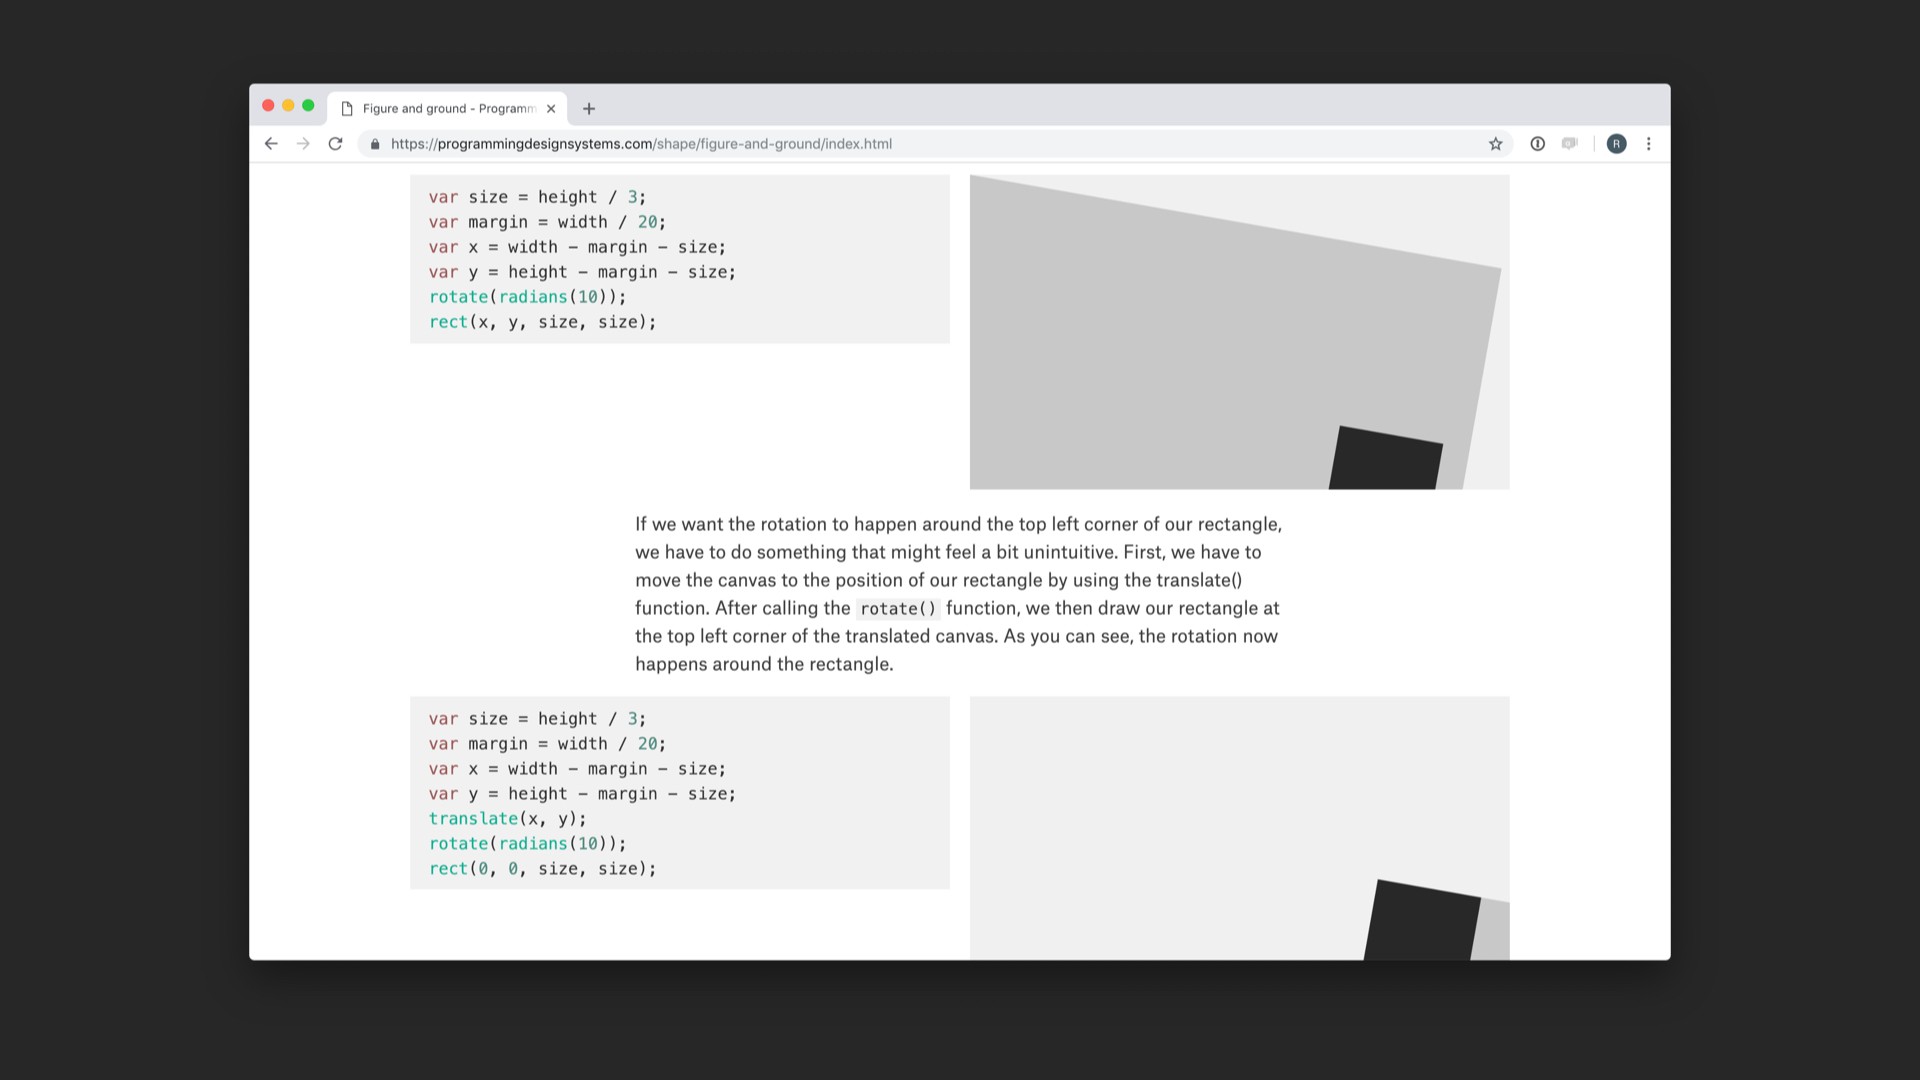 Screenshot of more examples side by side with code in referenced website.